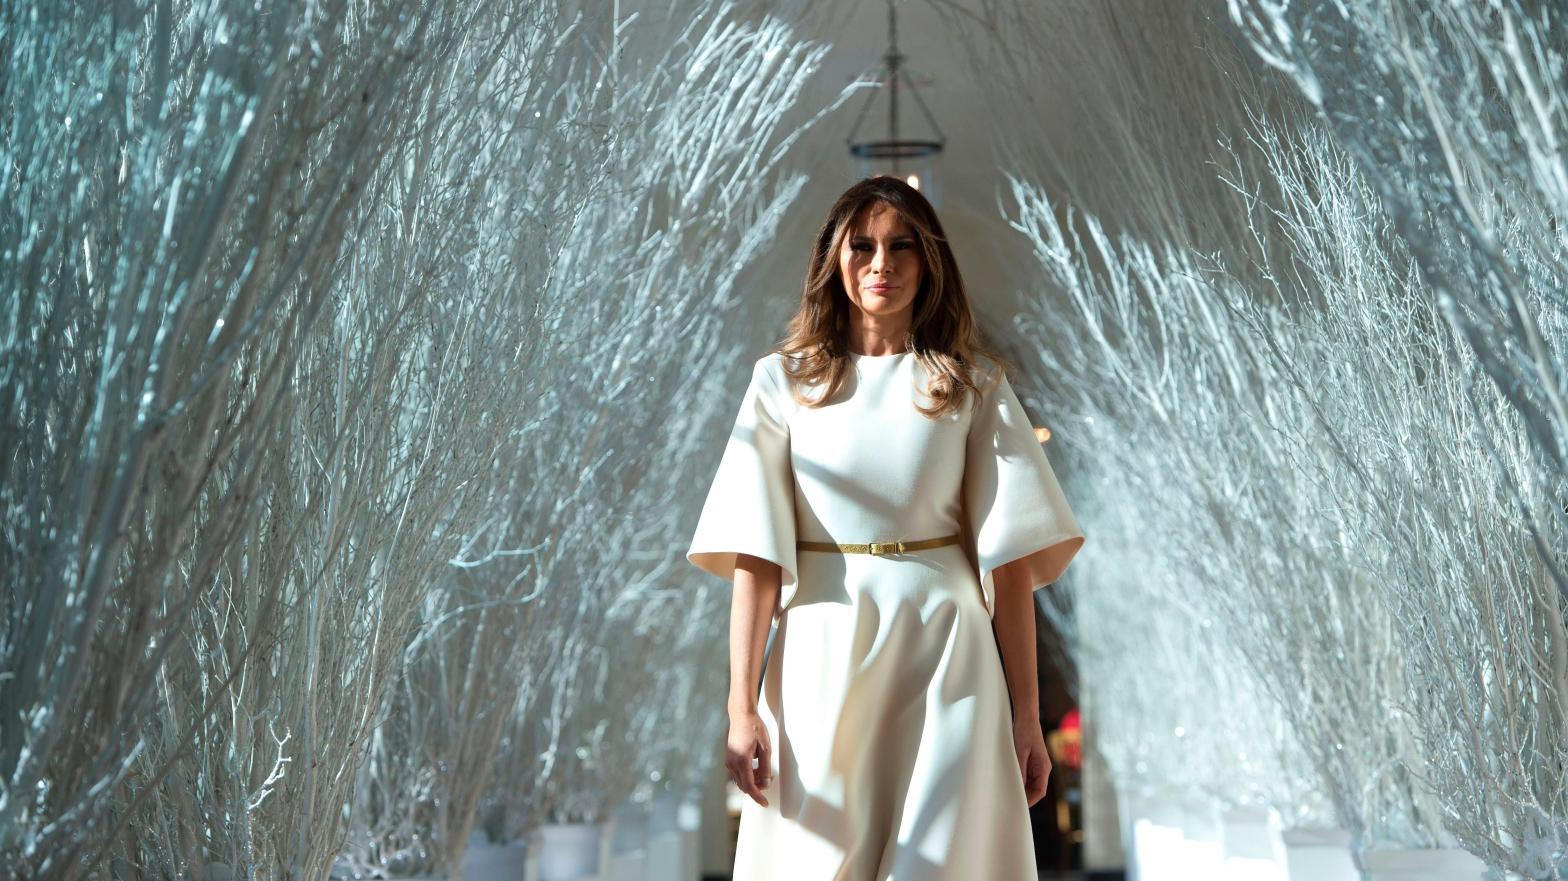 Former First Lady Melania Trump walks through the East Wing of the White House, which she decorated, during Christmas in 2017. (Photo: Saul Loeb / AFP, Getty Images)